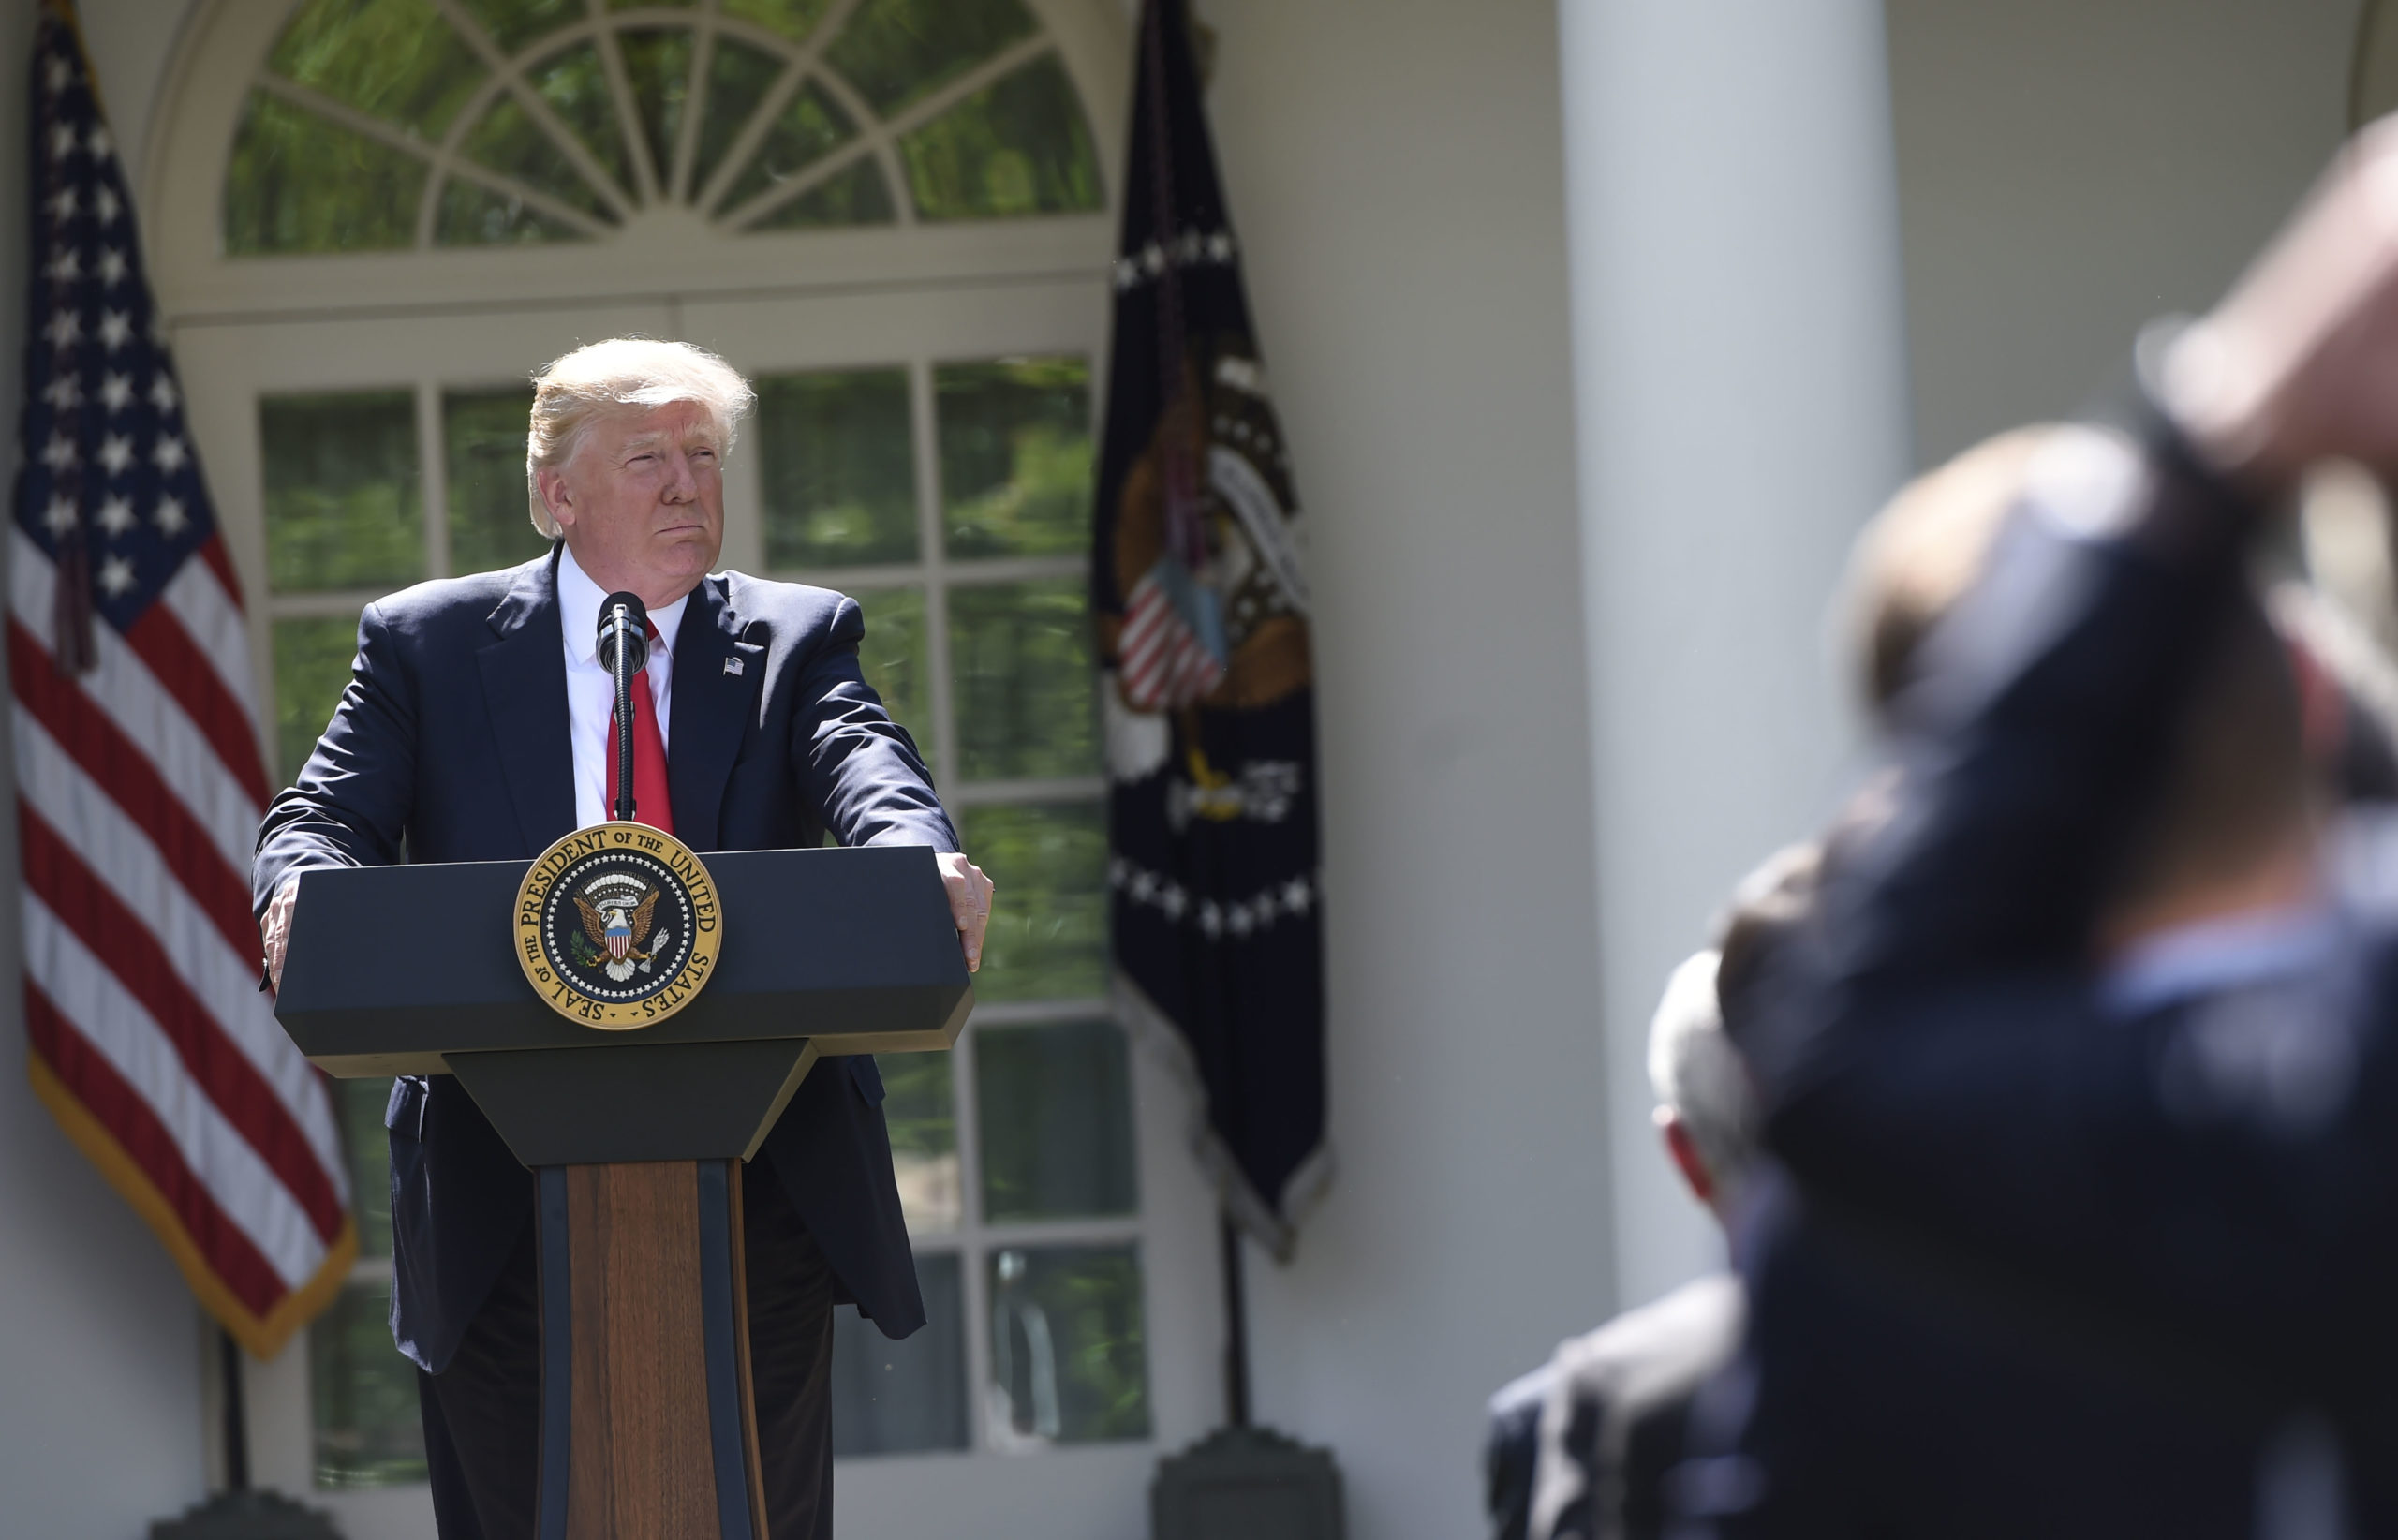 President Donald Trump announces the U.S. would withdraw from the Paris Climate Accords on June 1, 2017. (Saul Loeb/AFP via Getty Images)